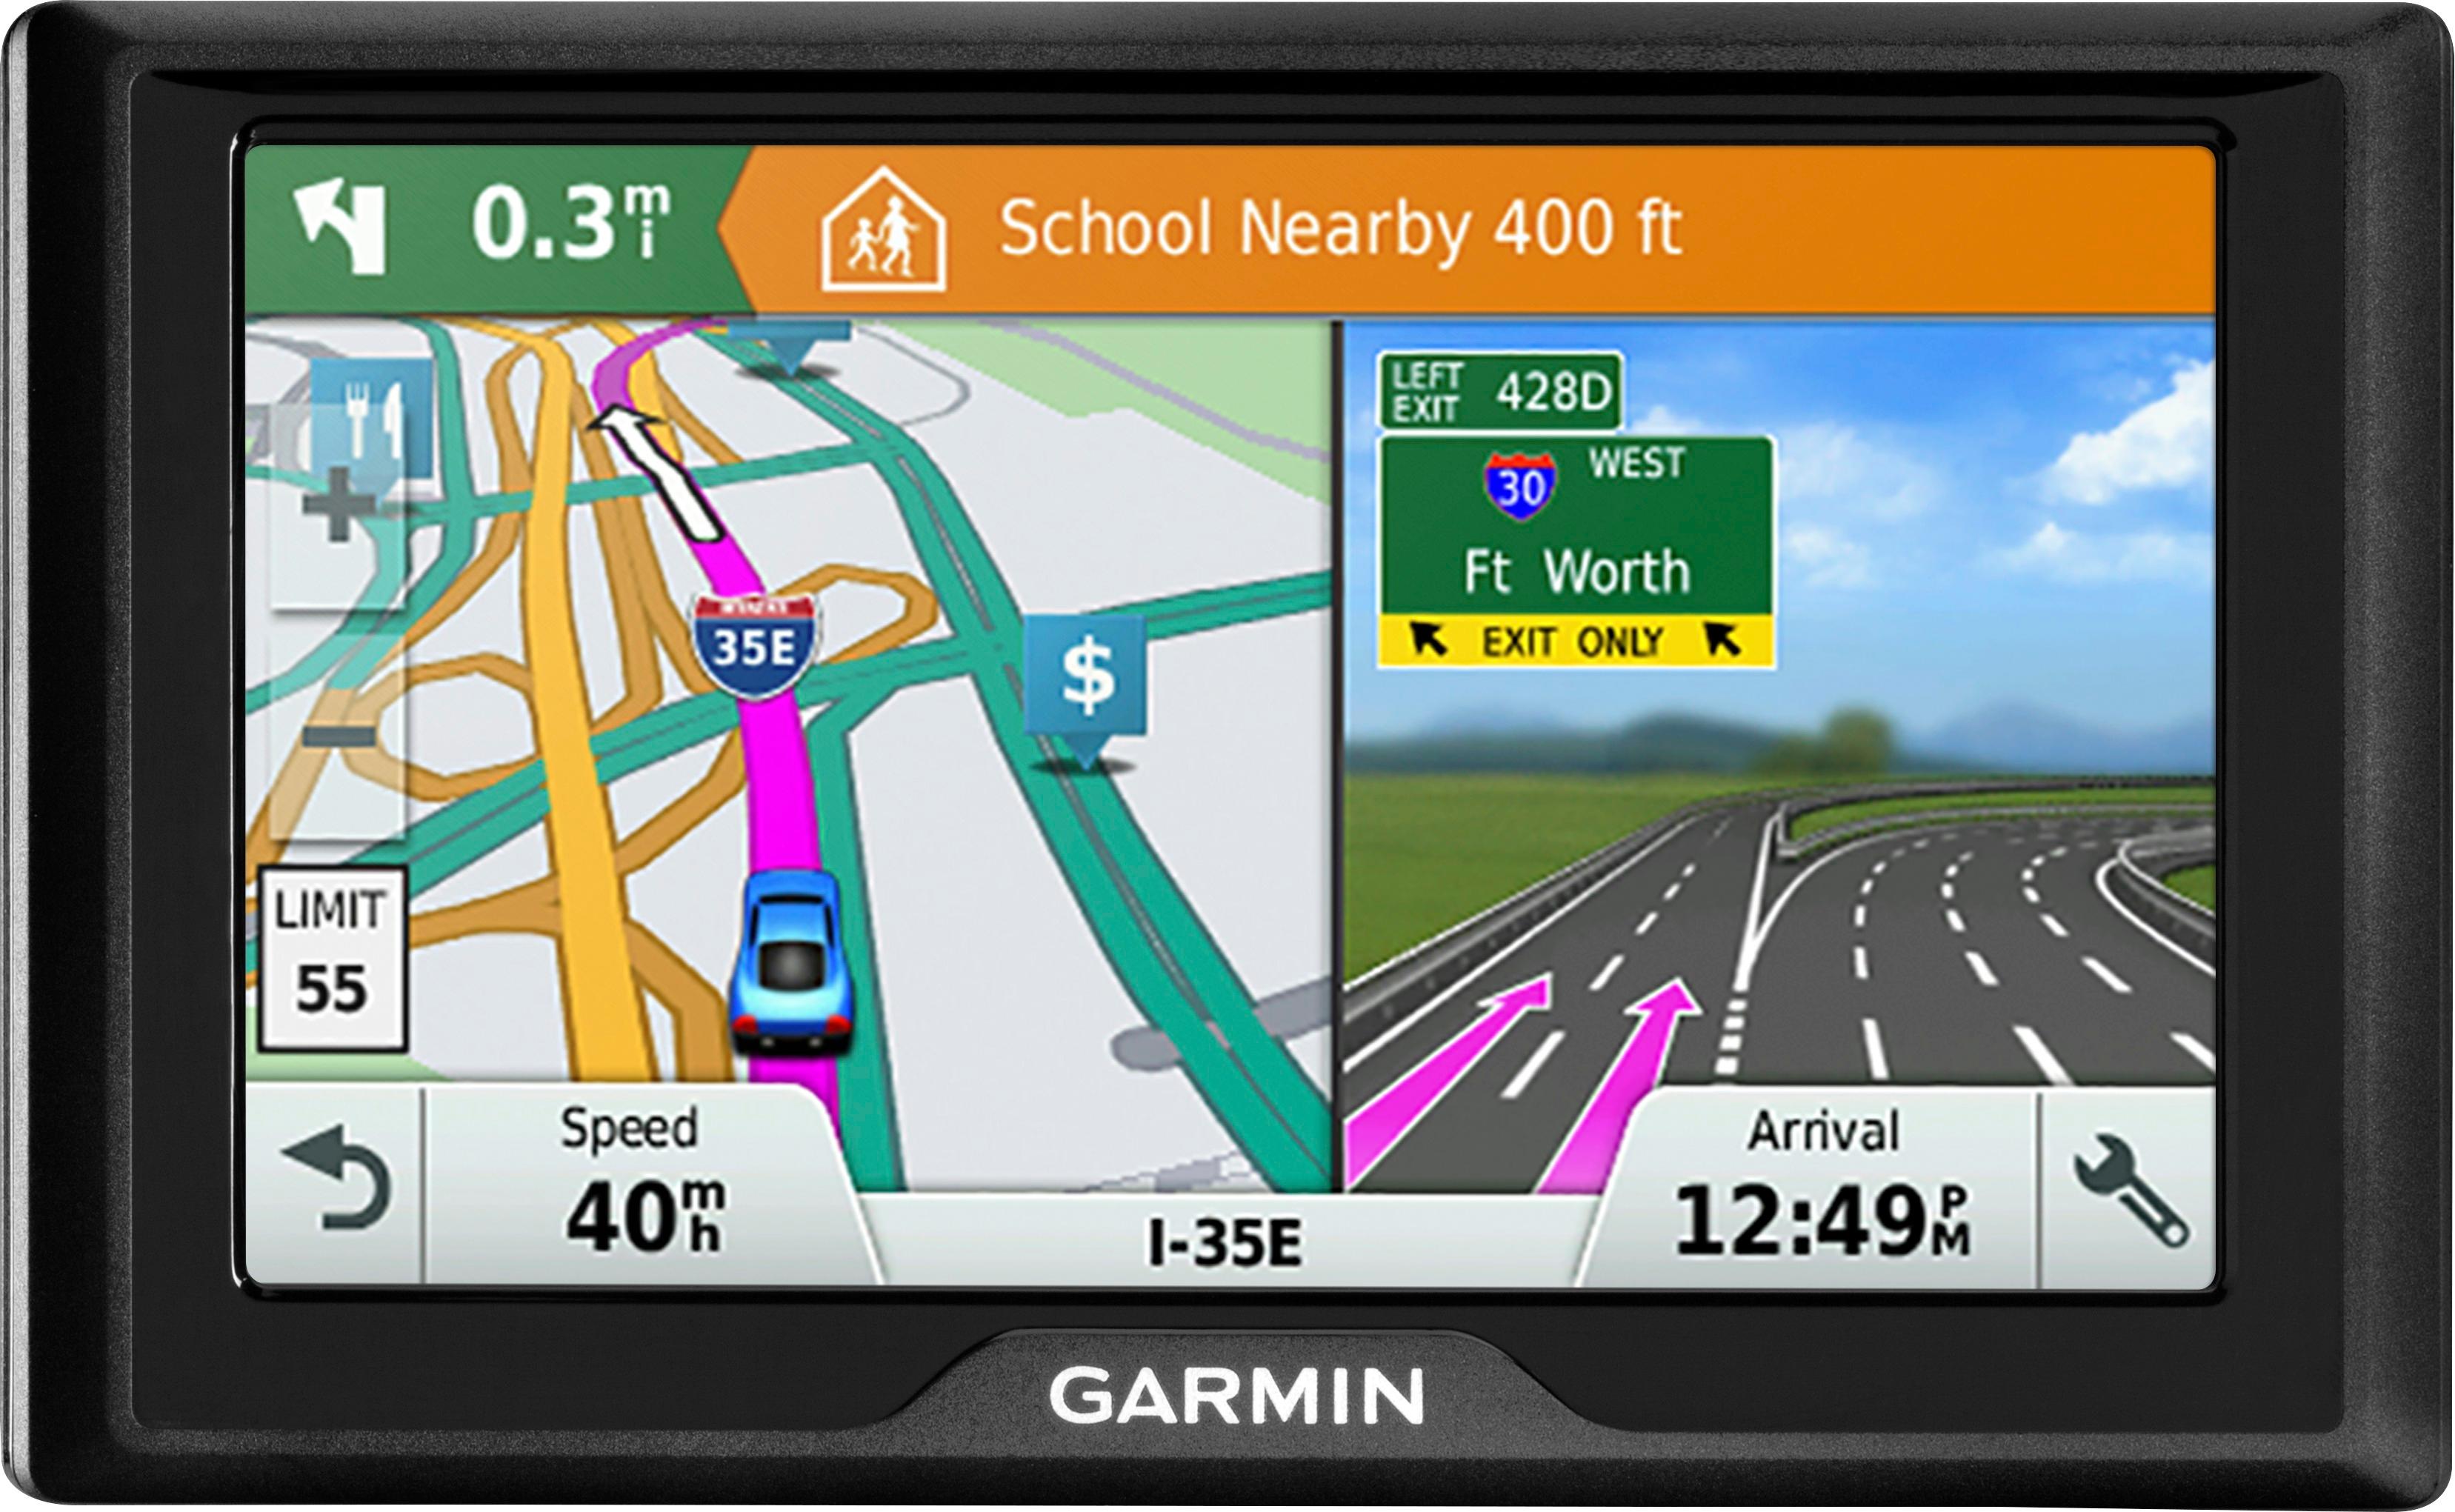 Garmin - Drive 51 LM 5 GPS with Lifetime Map Updates - Black was $129.99 now $102.99 (21.0% off)